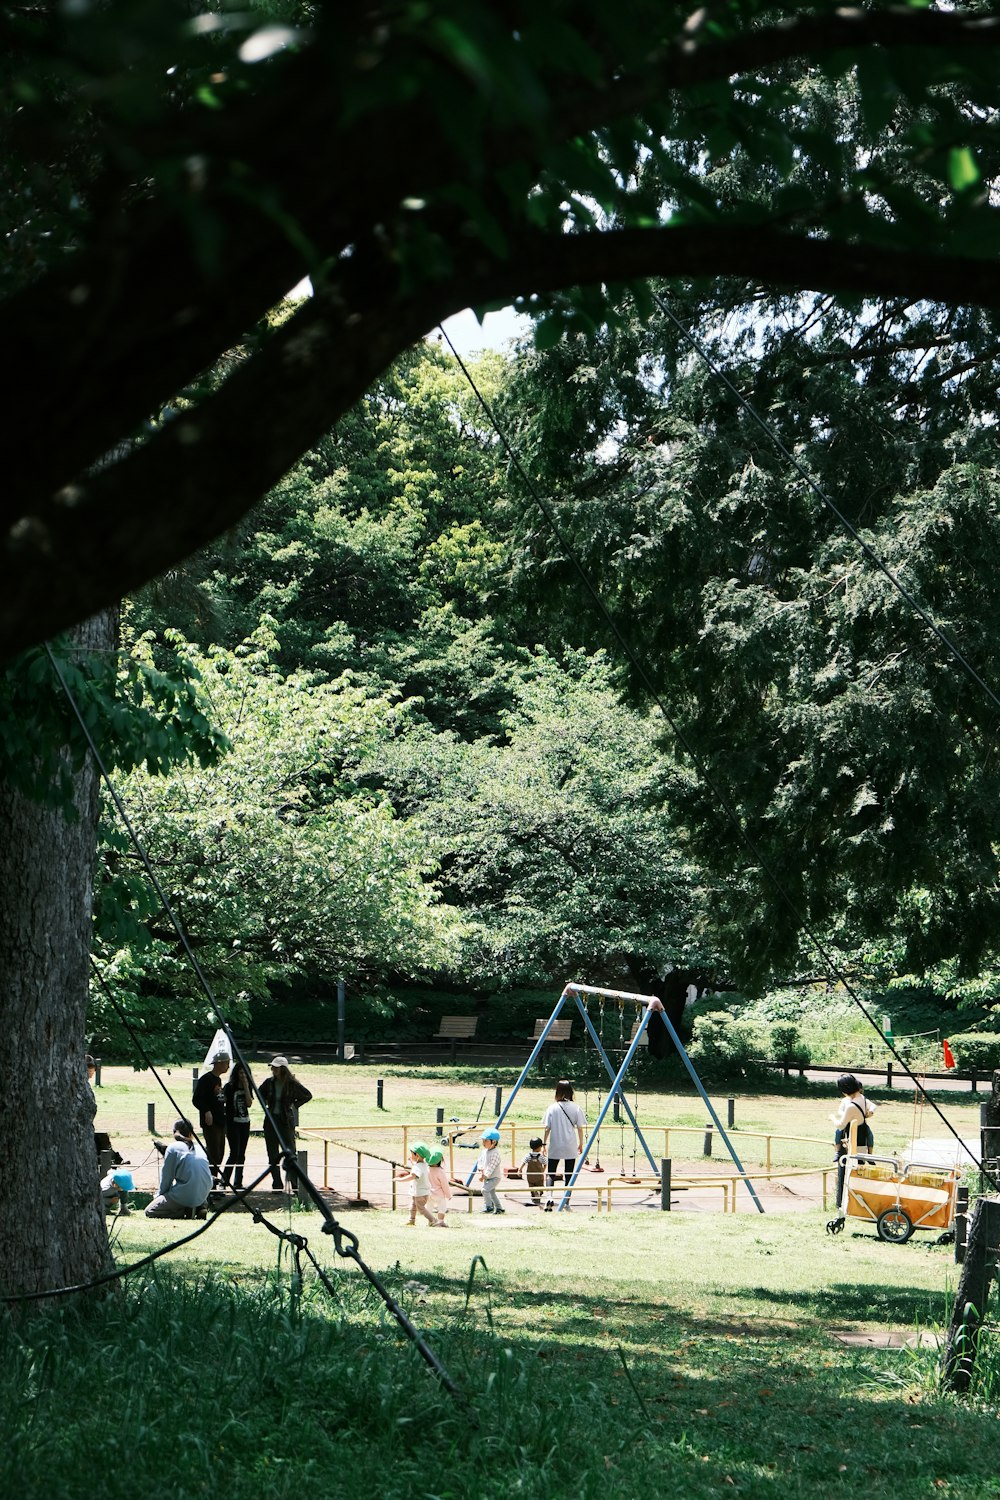 a group of people playing in a park